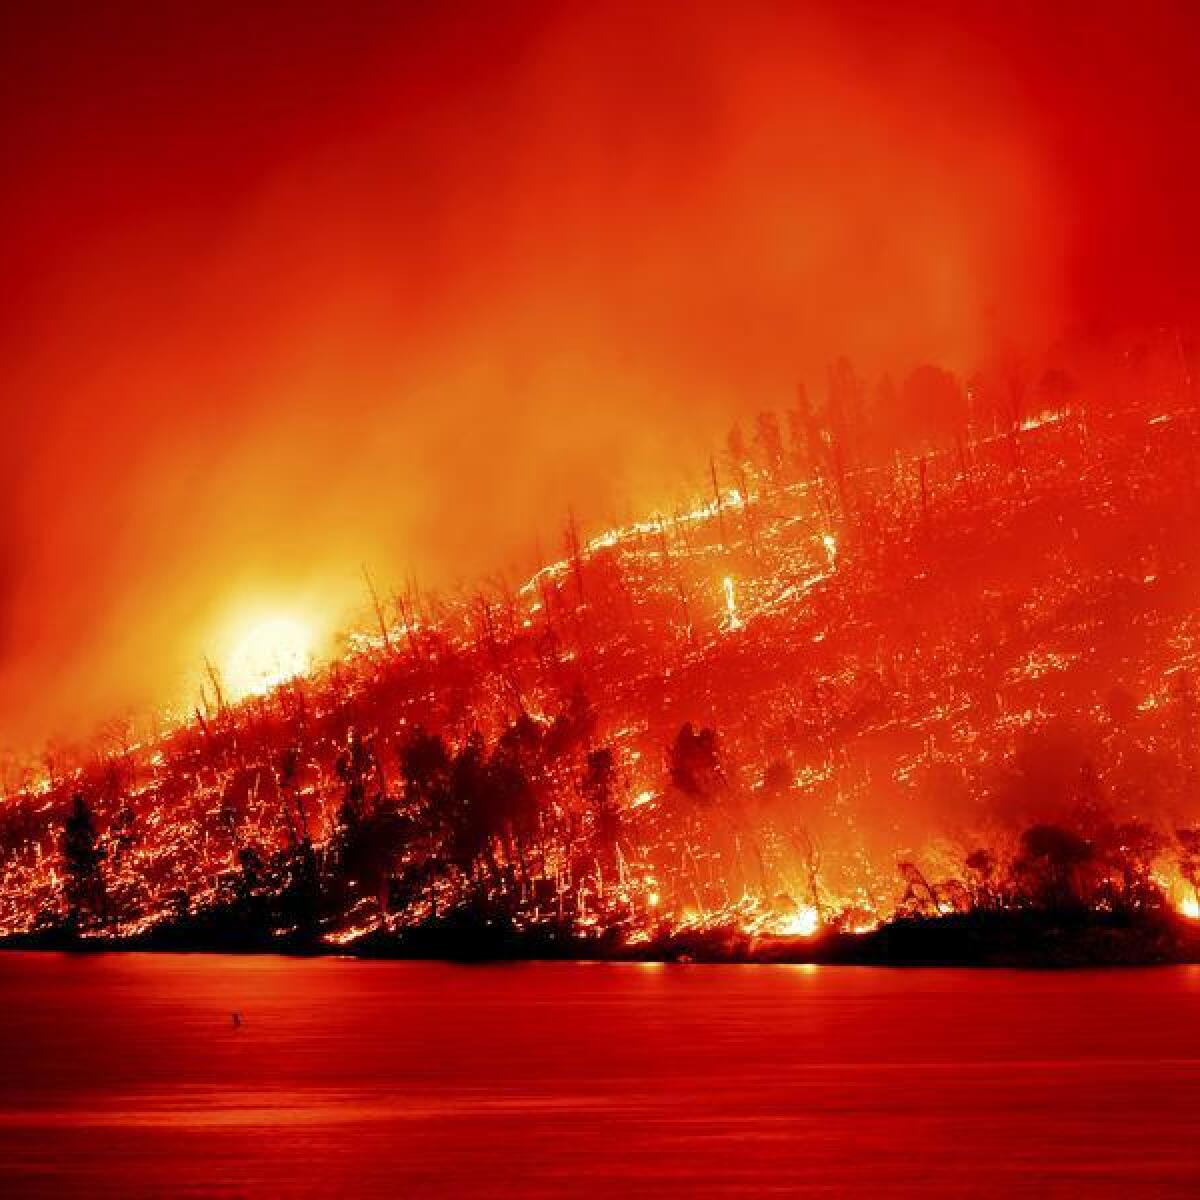 The Thompson Fire in Oroville, California